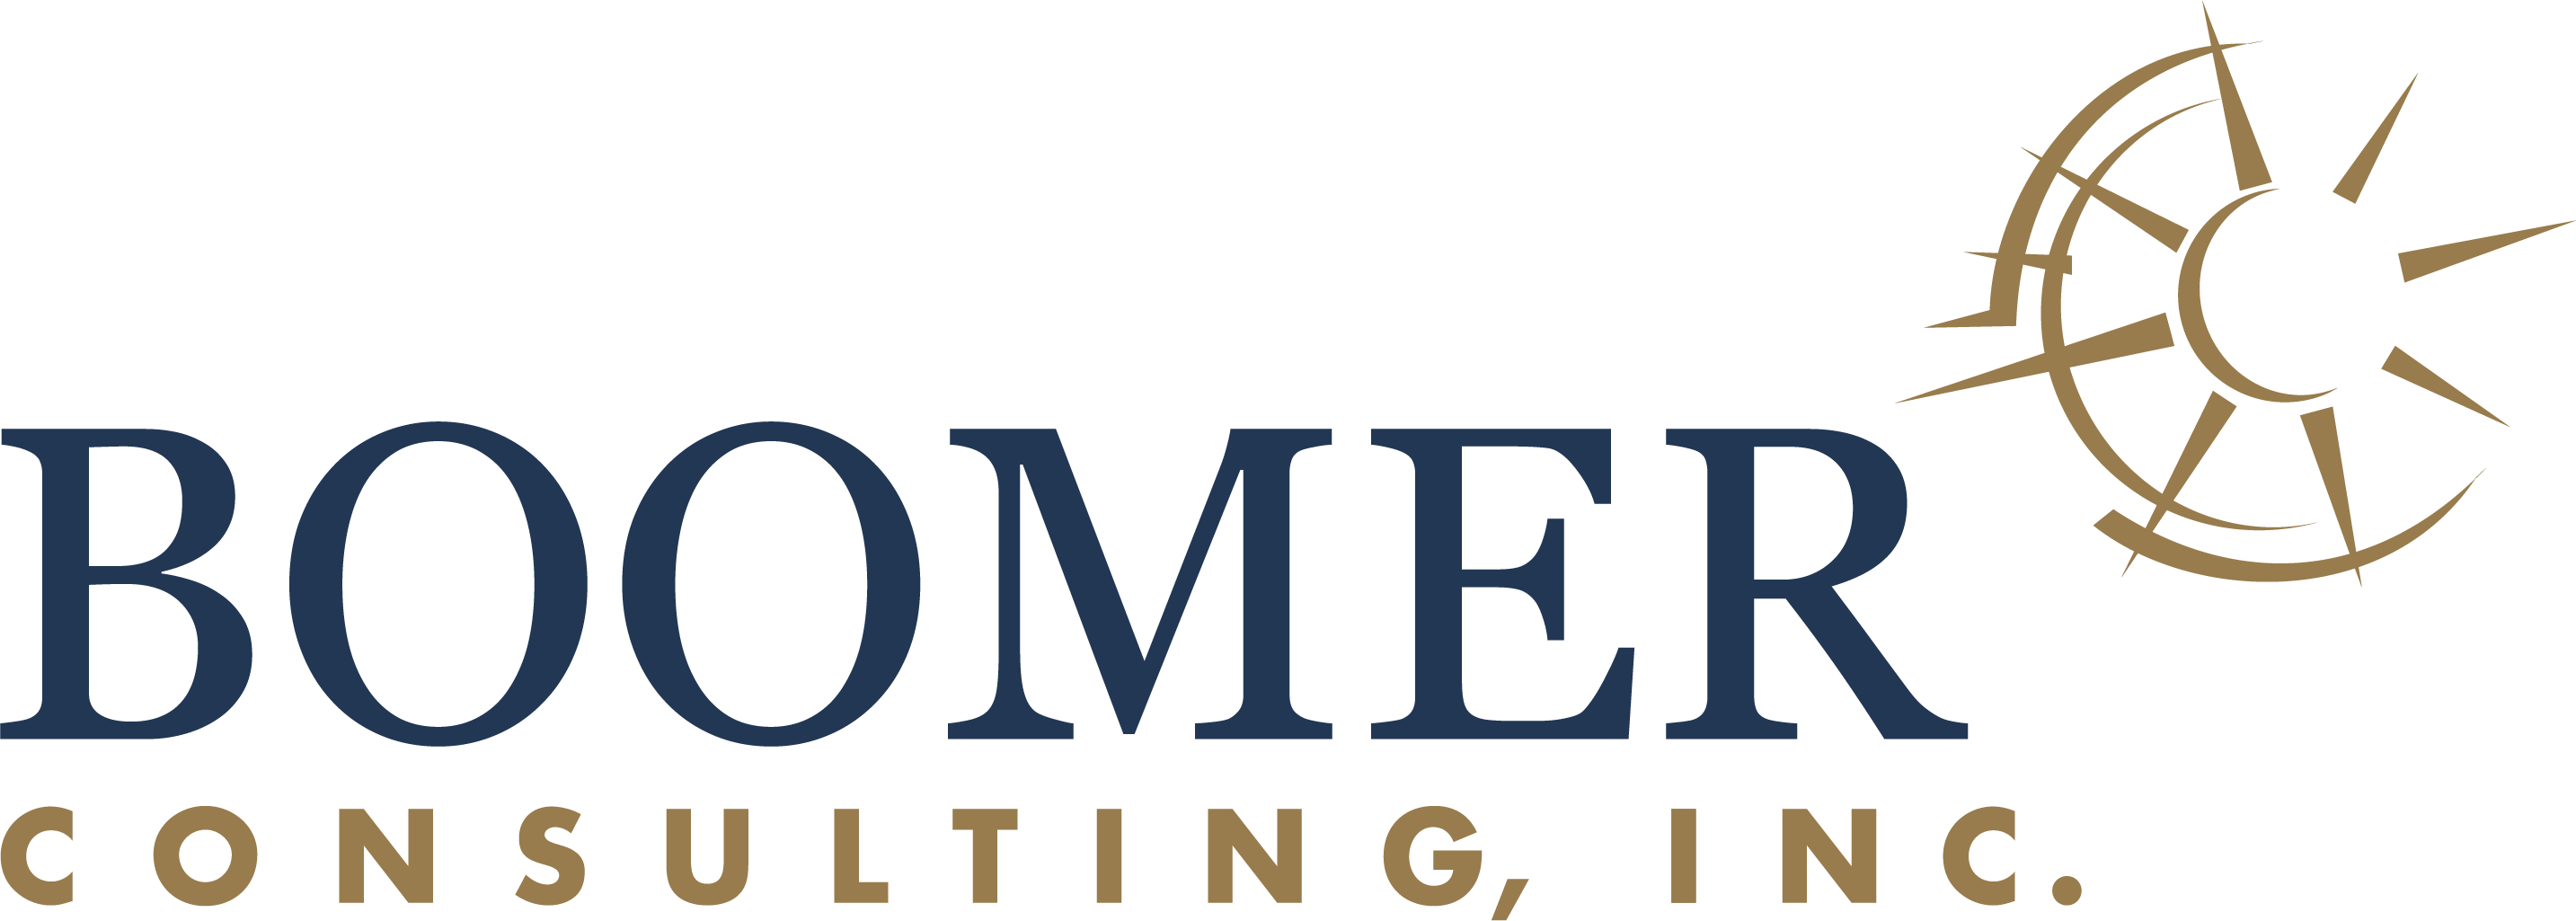 Boomer Consulting Inc.